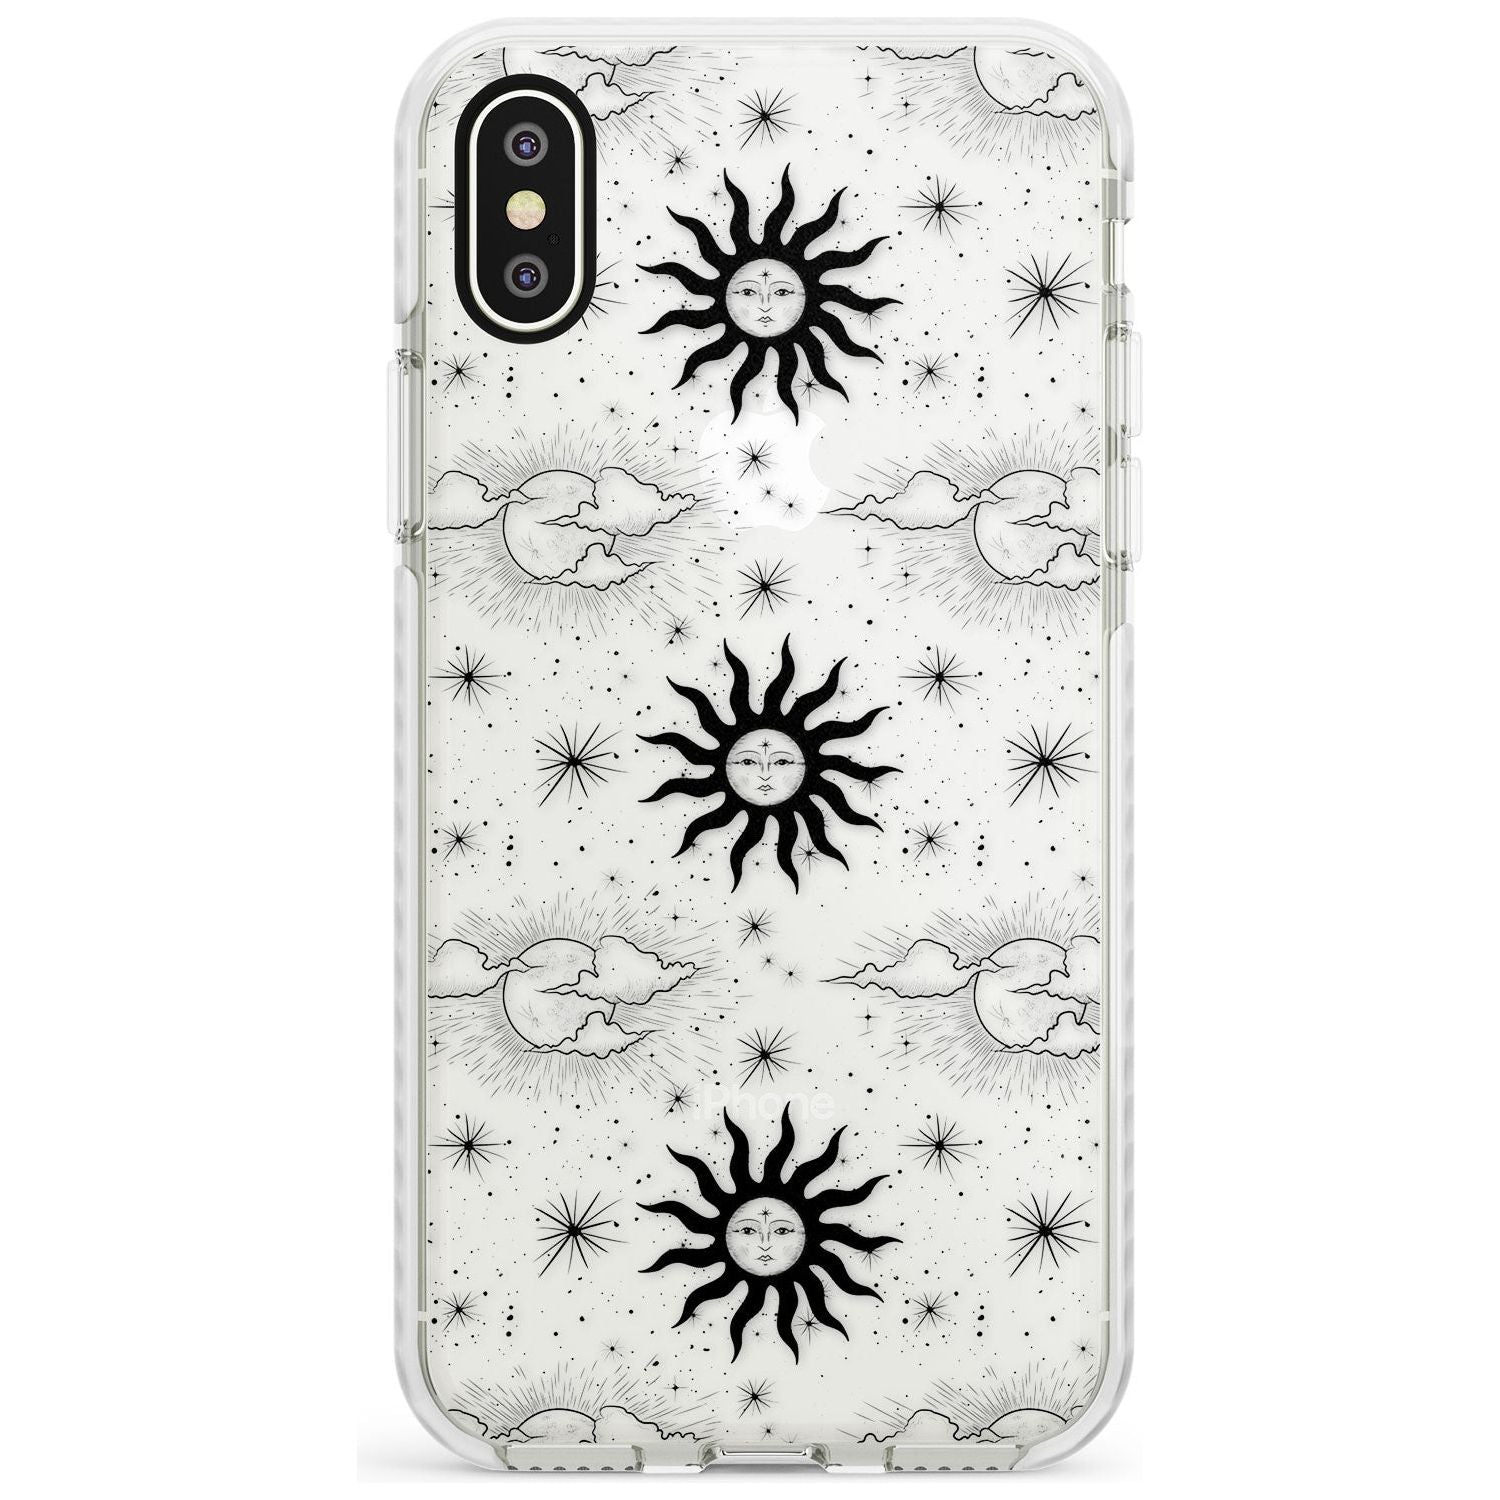 Suns & Clouds Vintage Astrological Impact Phone Case for iPhone X XS Max XR